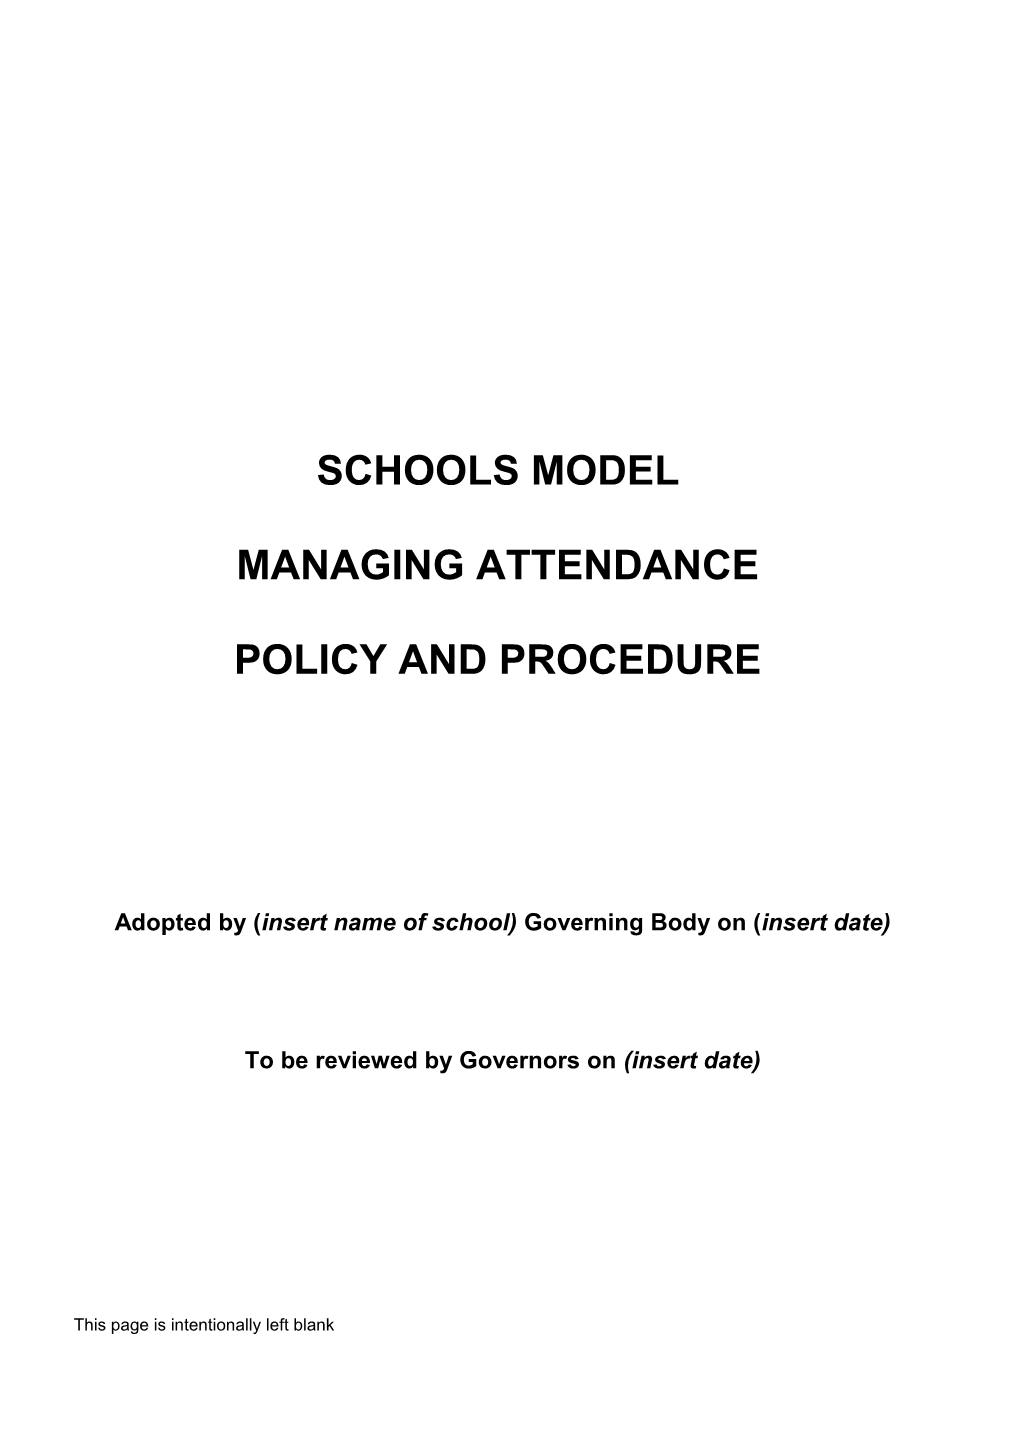 Adopted by (Insert Name of School) Governing Body on (Insert Date)